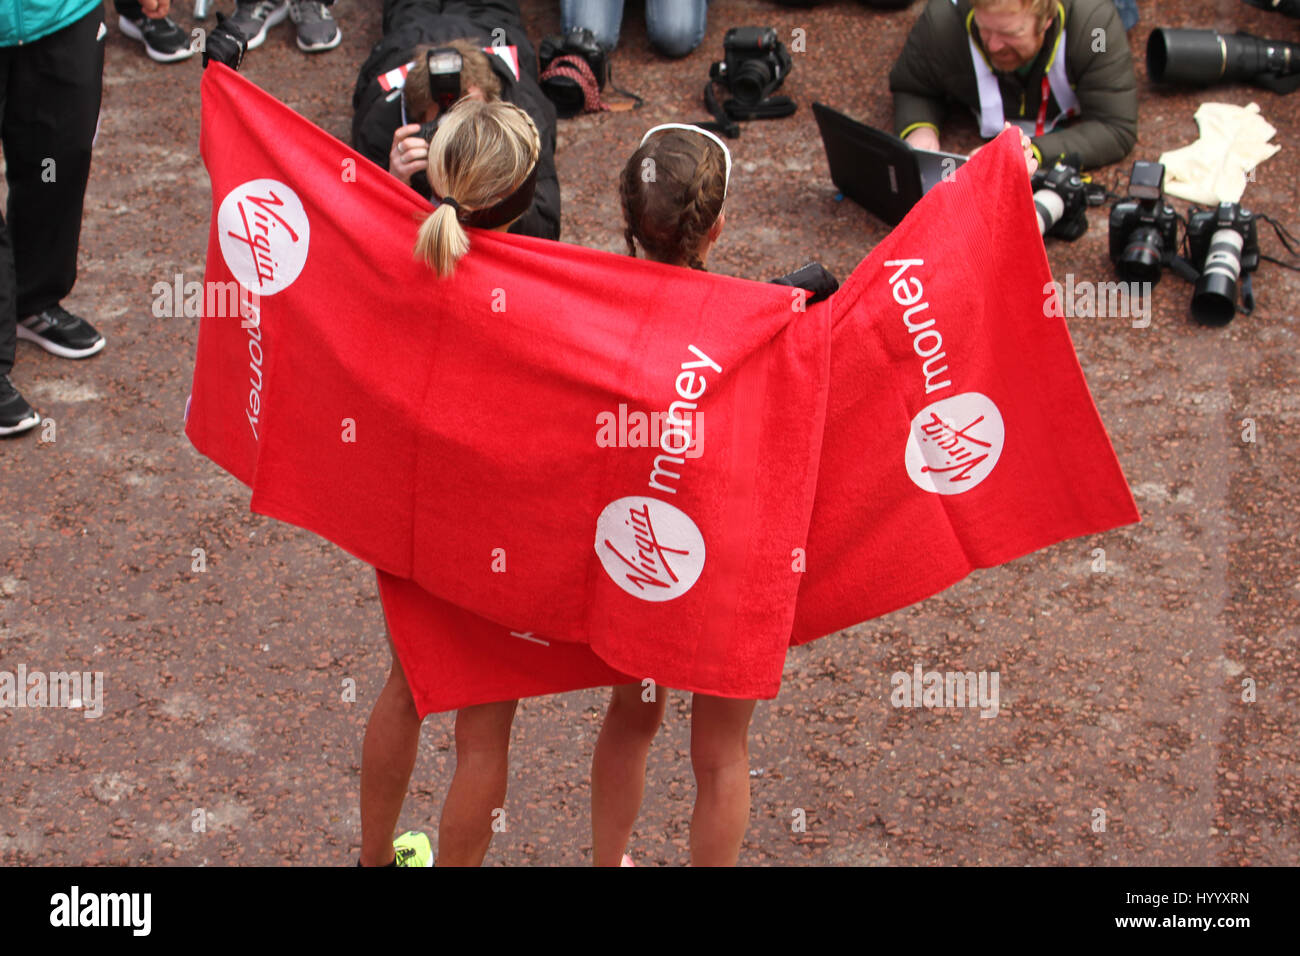 London, UK 24 April 2016. Virgin Money London Marathon female finishers pose for press photos at the Mall. The London Marathon’s one-millionth finisher will cross the line during this years race, a milestone in the history of the race that started in 1981. The men's course records is 2:04:29 (2014), held by Wilson Kipsang and women's: 2:15:25 (2003) held by Paula Radcliffe. © David Mbiyu/Alamy Live News Stock Photo